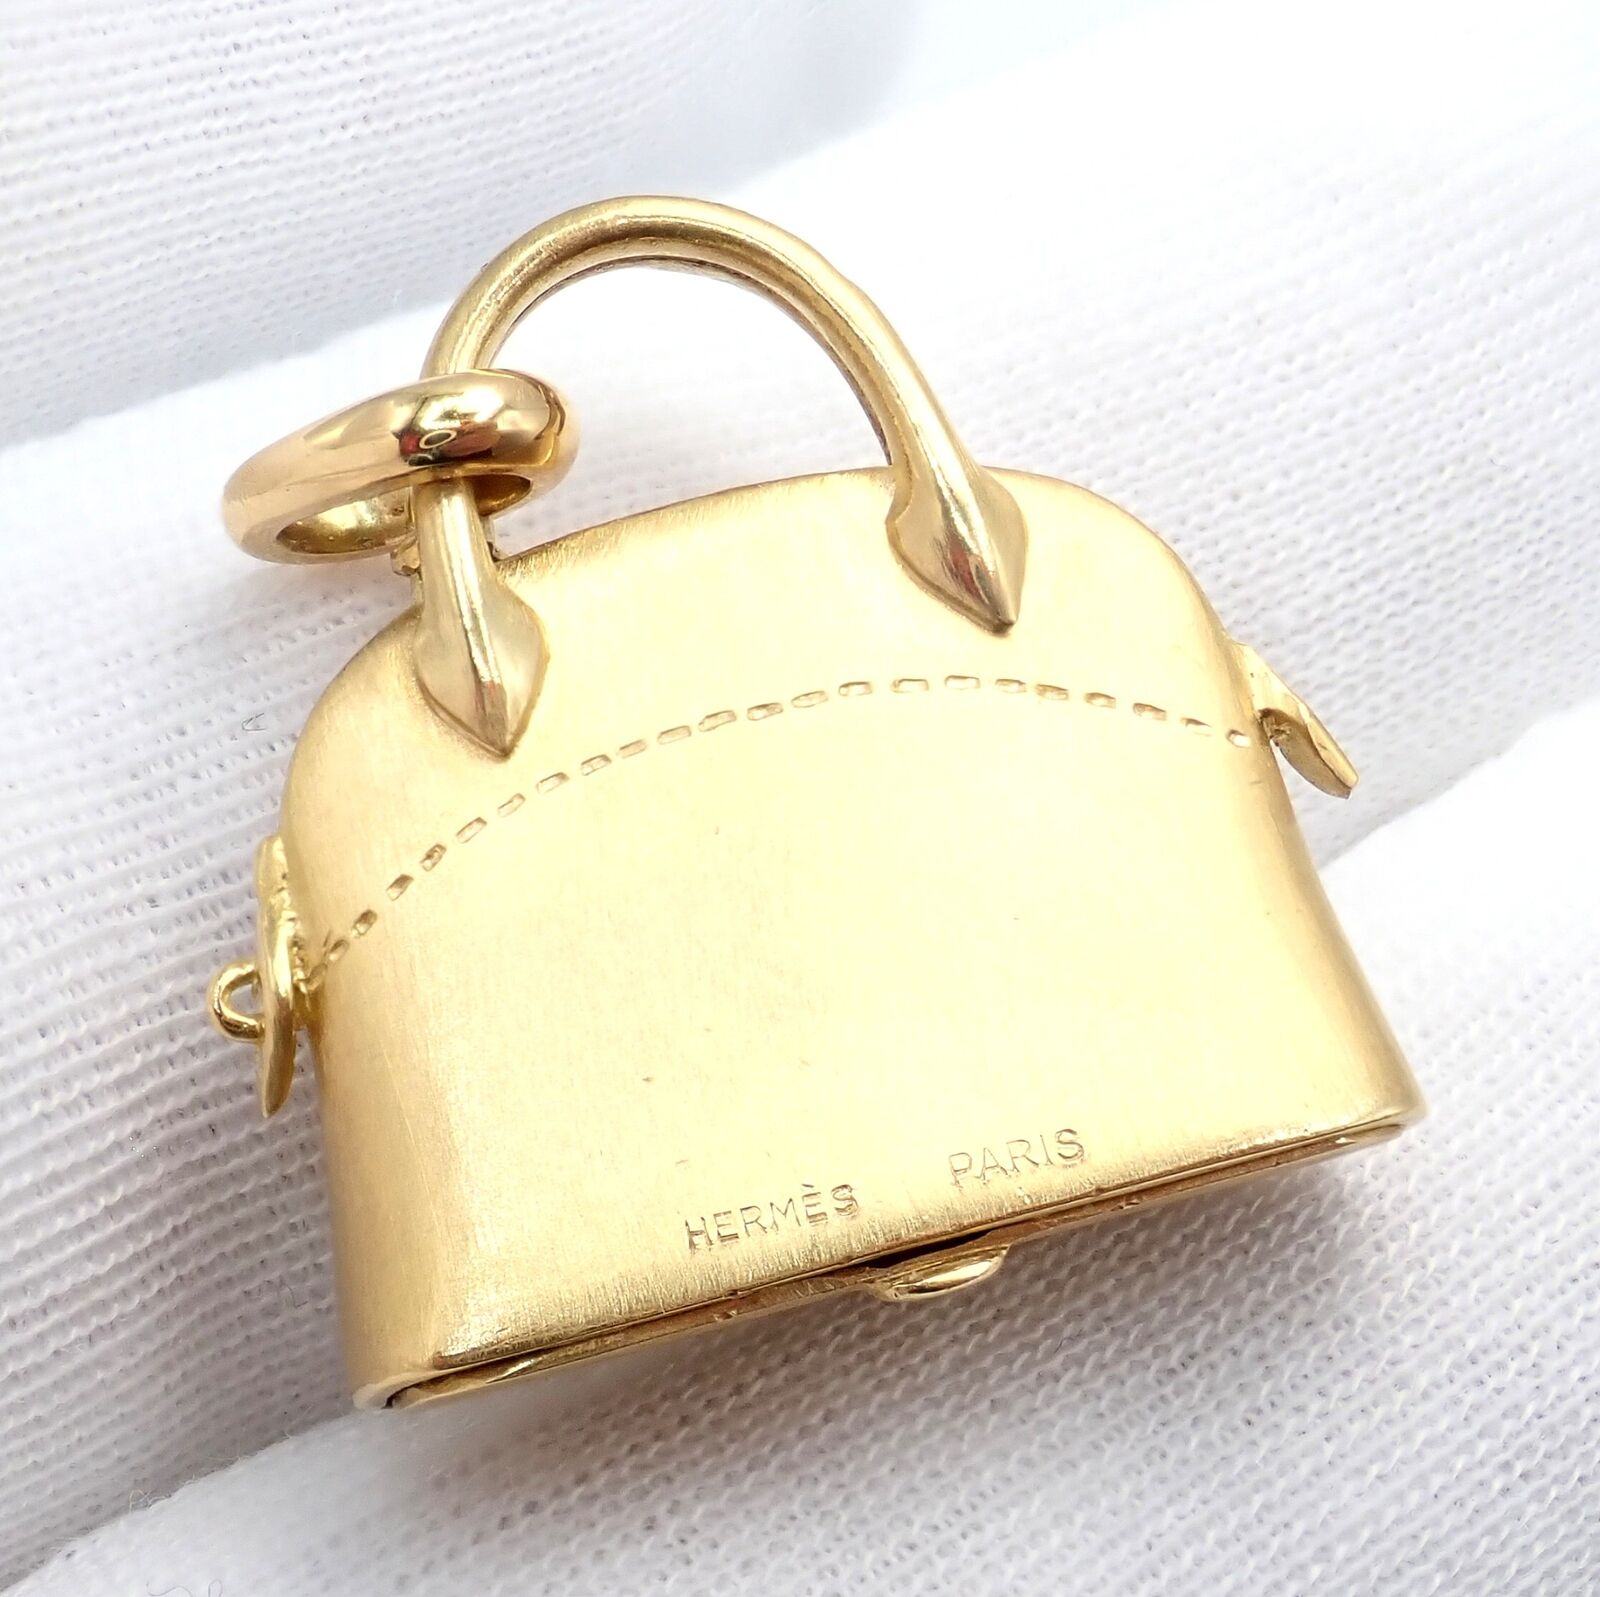 HERMÈS Jewelry & Watches:Fine Jewelry:Bracelets & Charms Rare! Authentic Hermes Bolide 18k Yellow Gold Bag Purse Large Charm Pendant